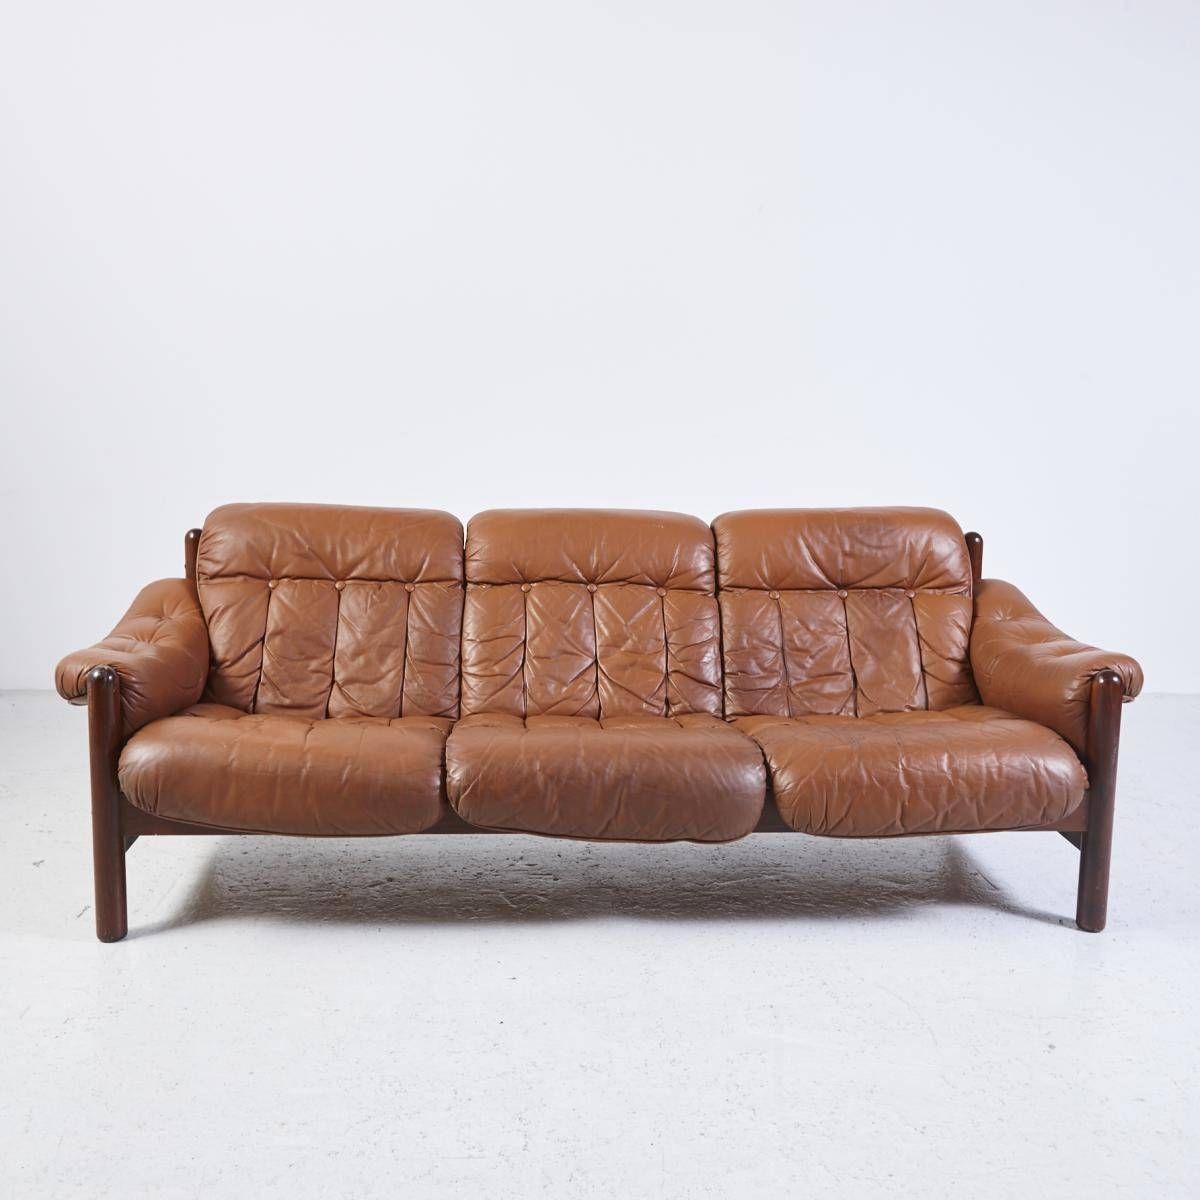 Vintage 3 Seater Leather Sofa With Teak Frame For Sale At Pamono Within 3 Seater Leather Sofas (View 12 of 30)